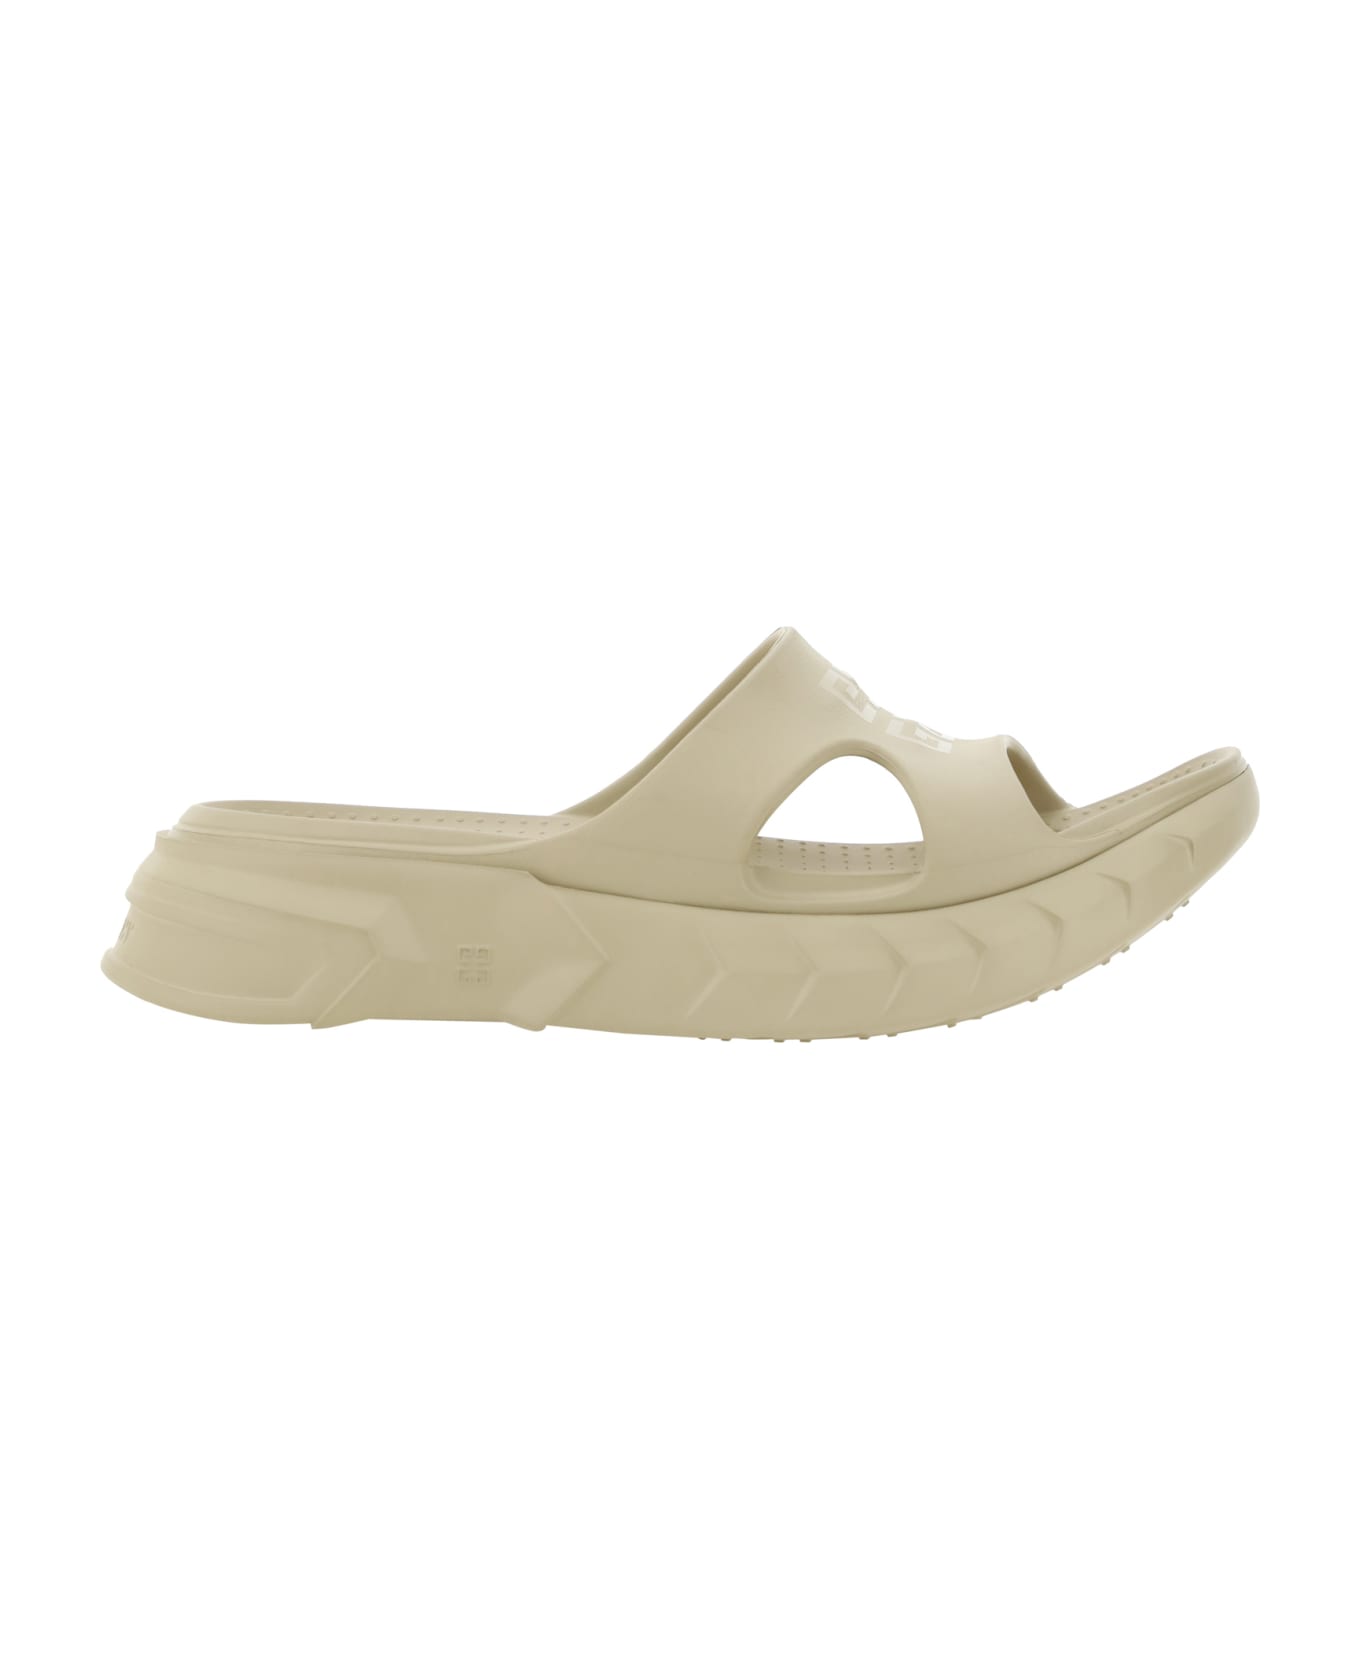 Givenchy Marshmallow Sandals - Beige